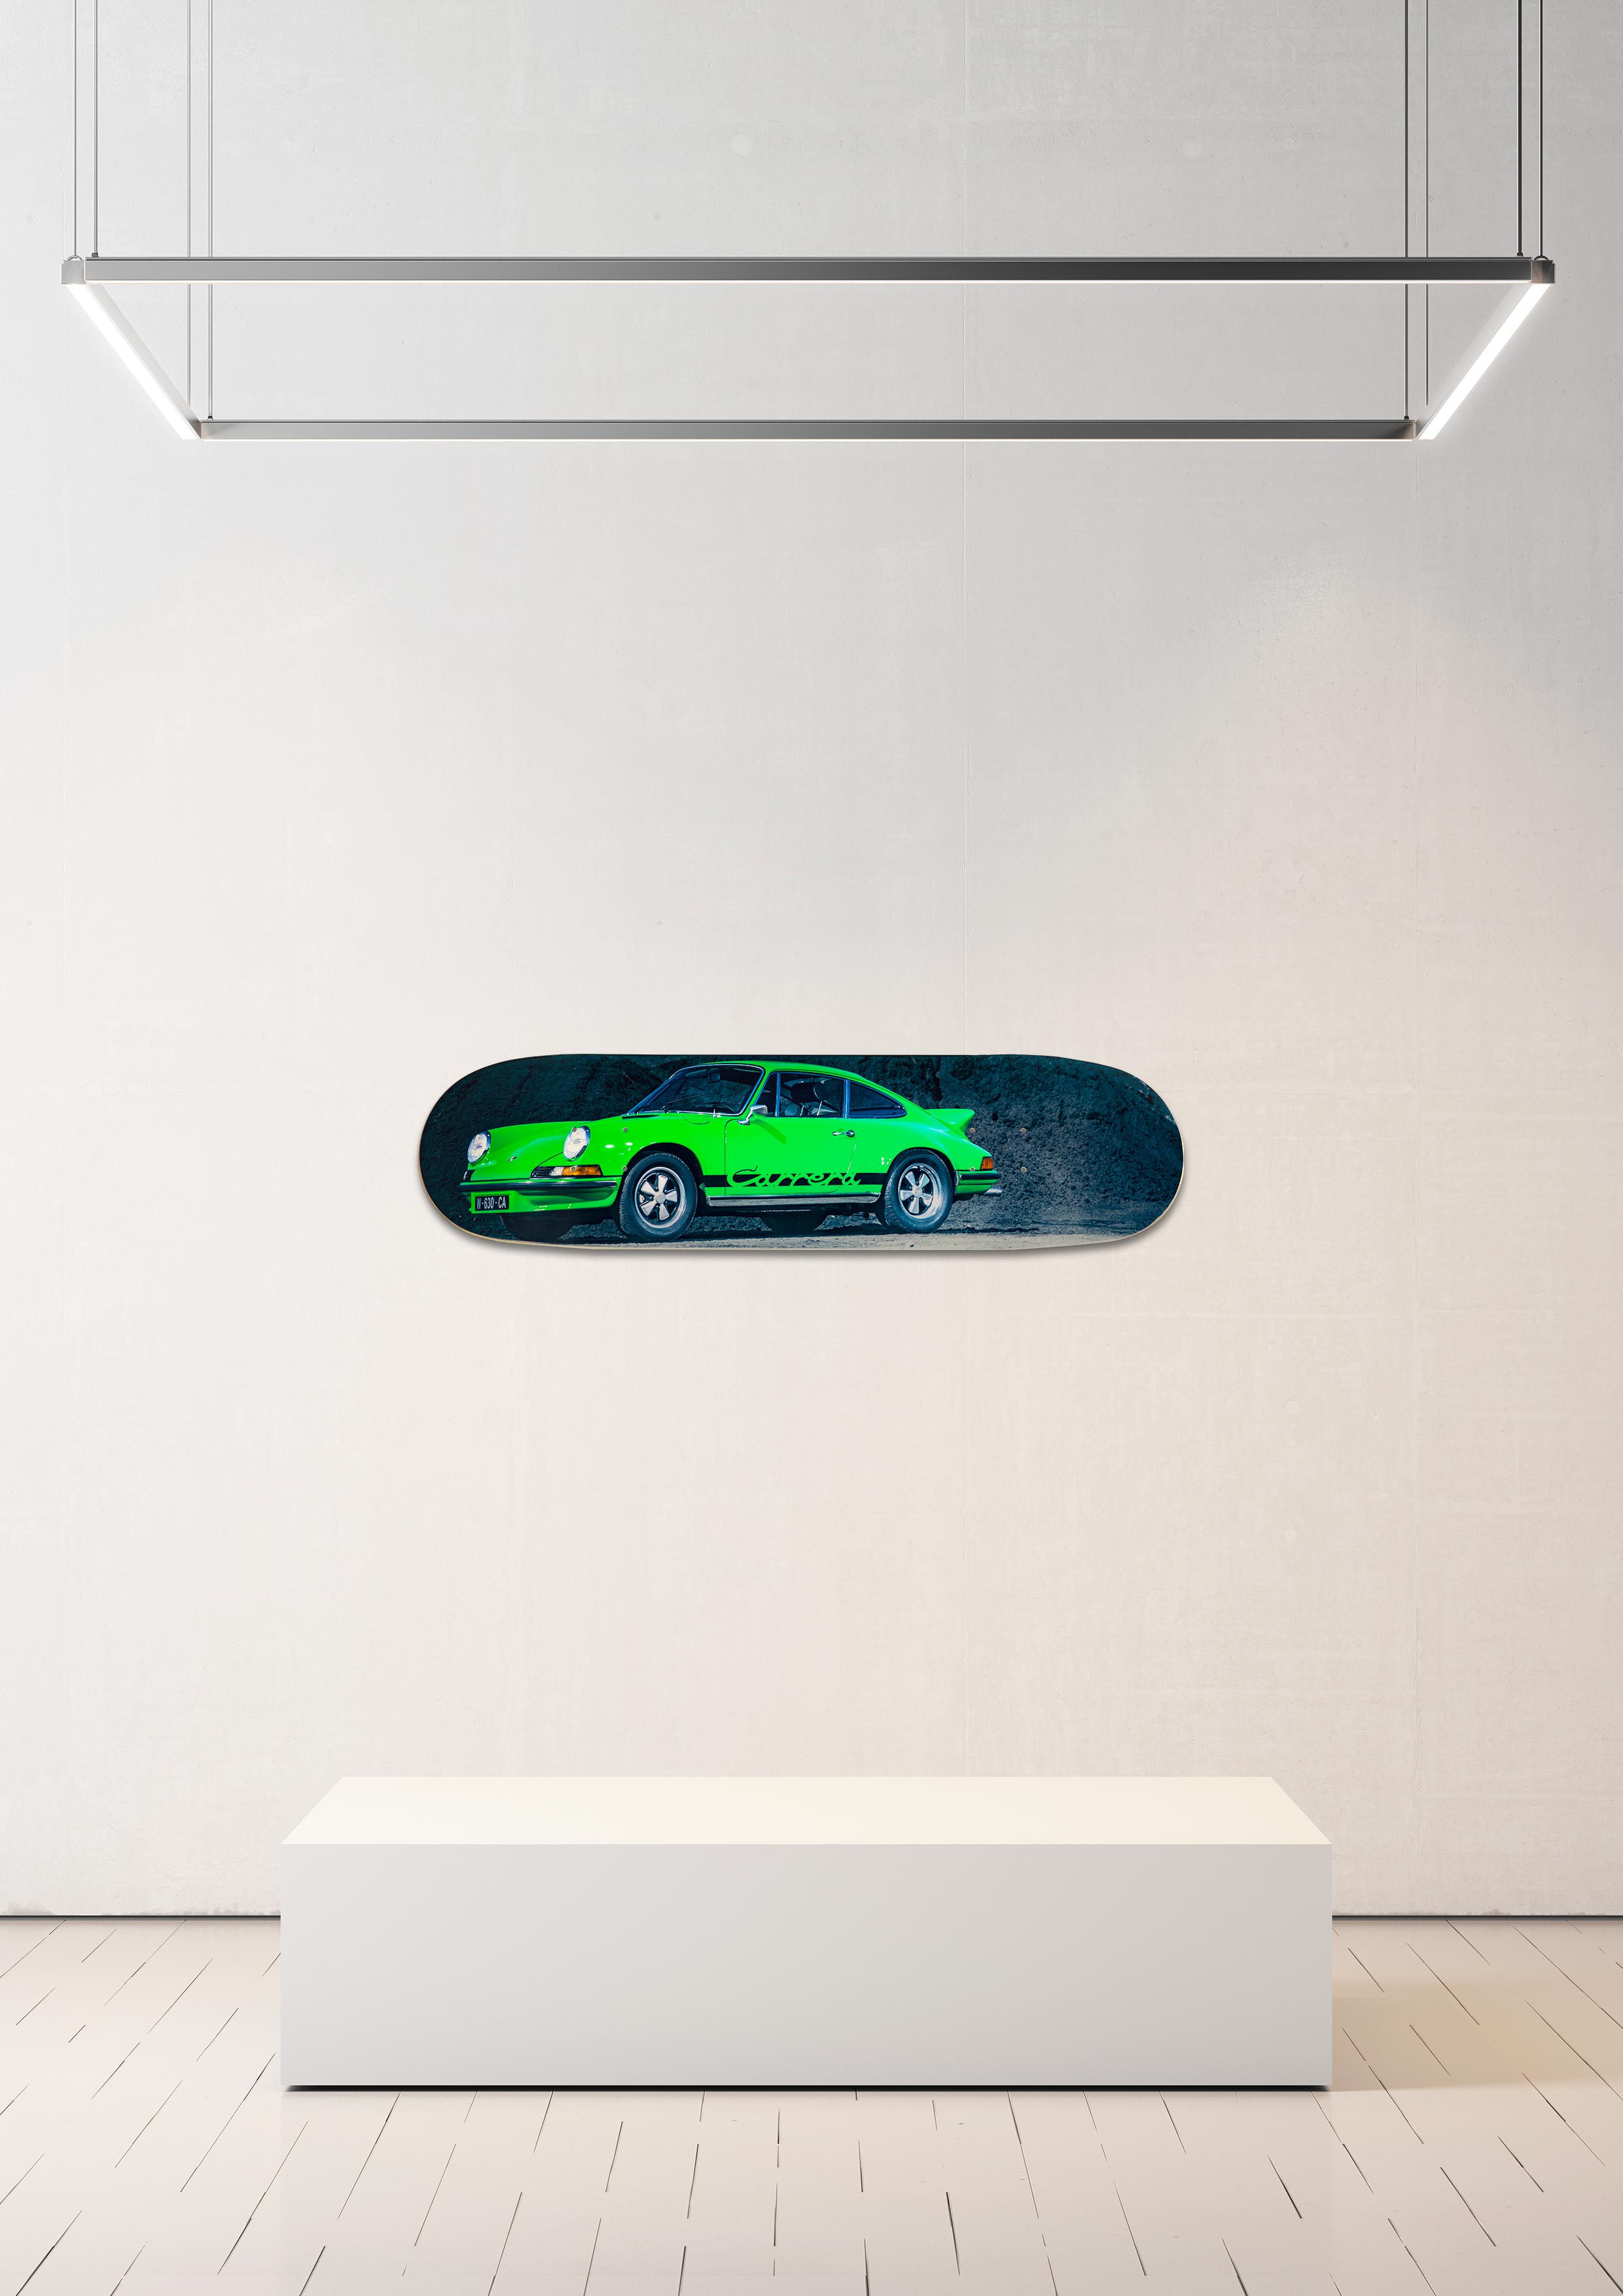 Wall skate board - very limited edition Porsche 911 Carrera 2.7 RS - Serge Heitz